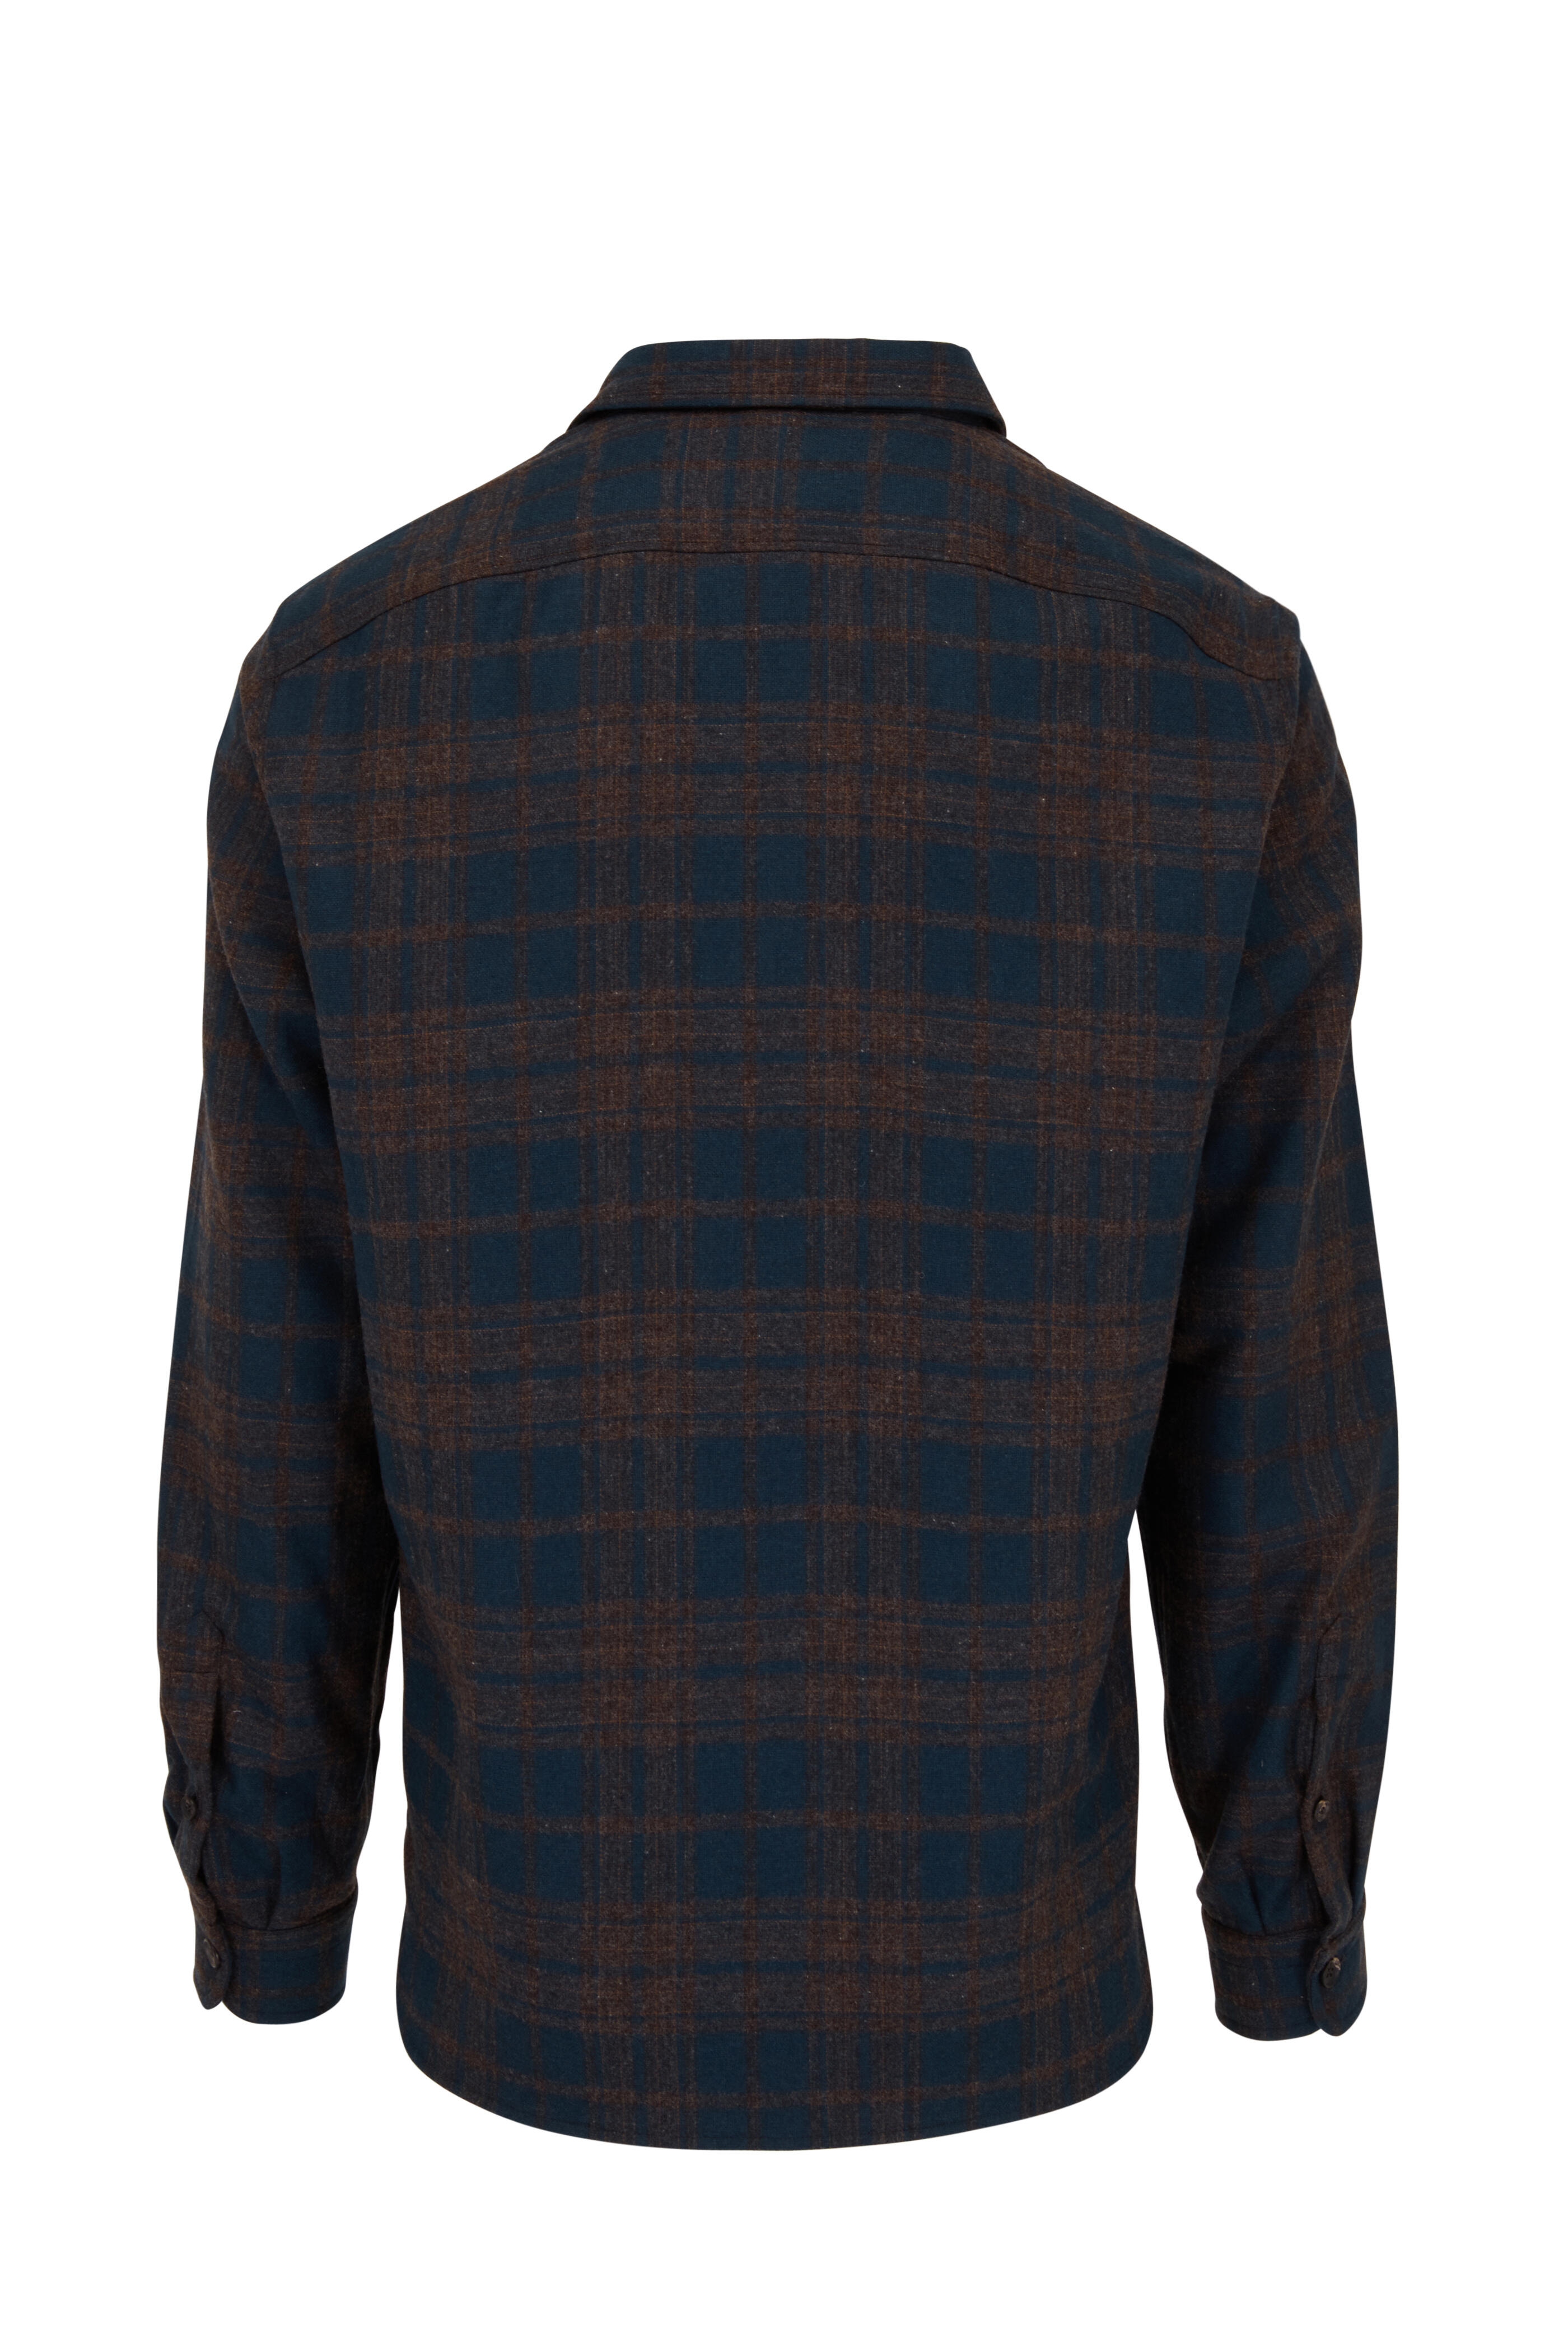 Isaia - Teal & Brown Plaid Double-Faced Overshirt